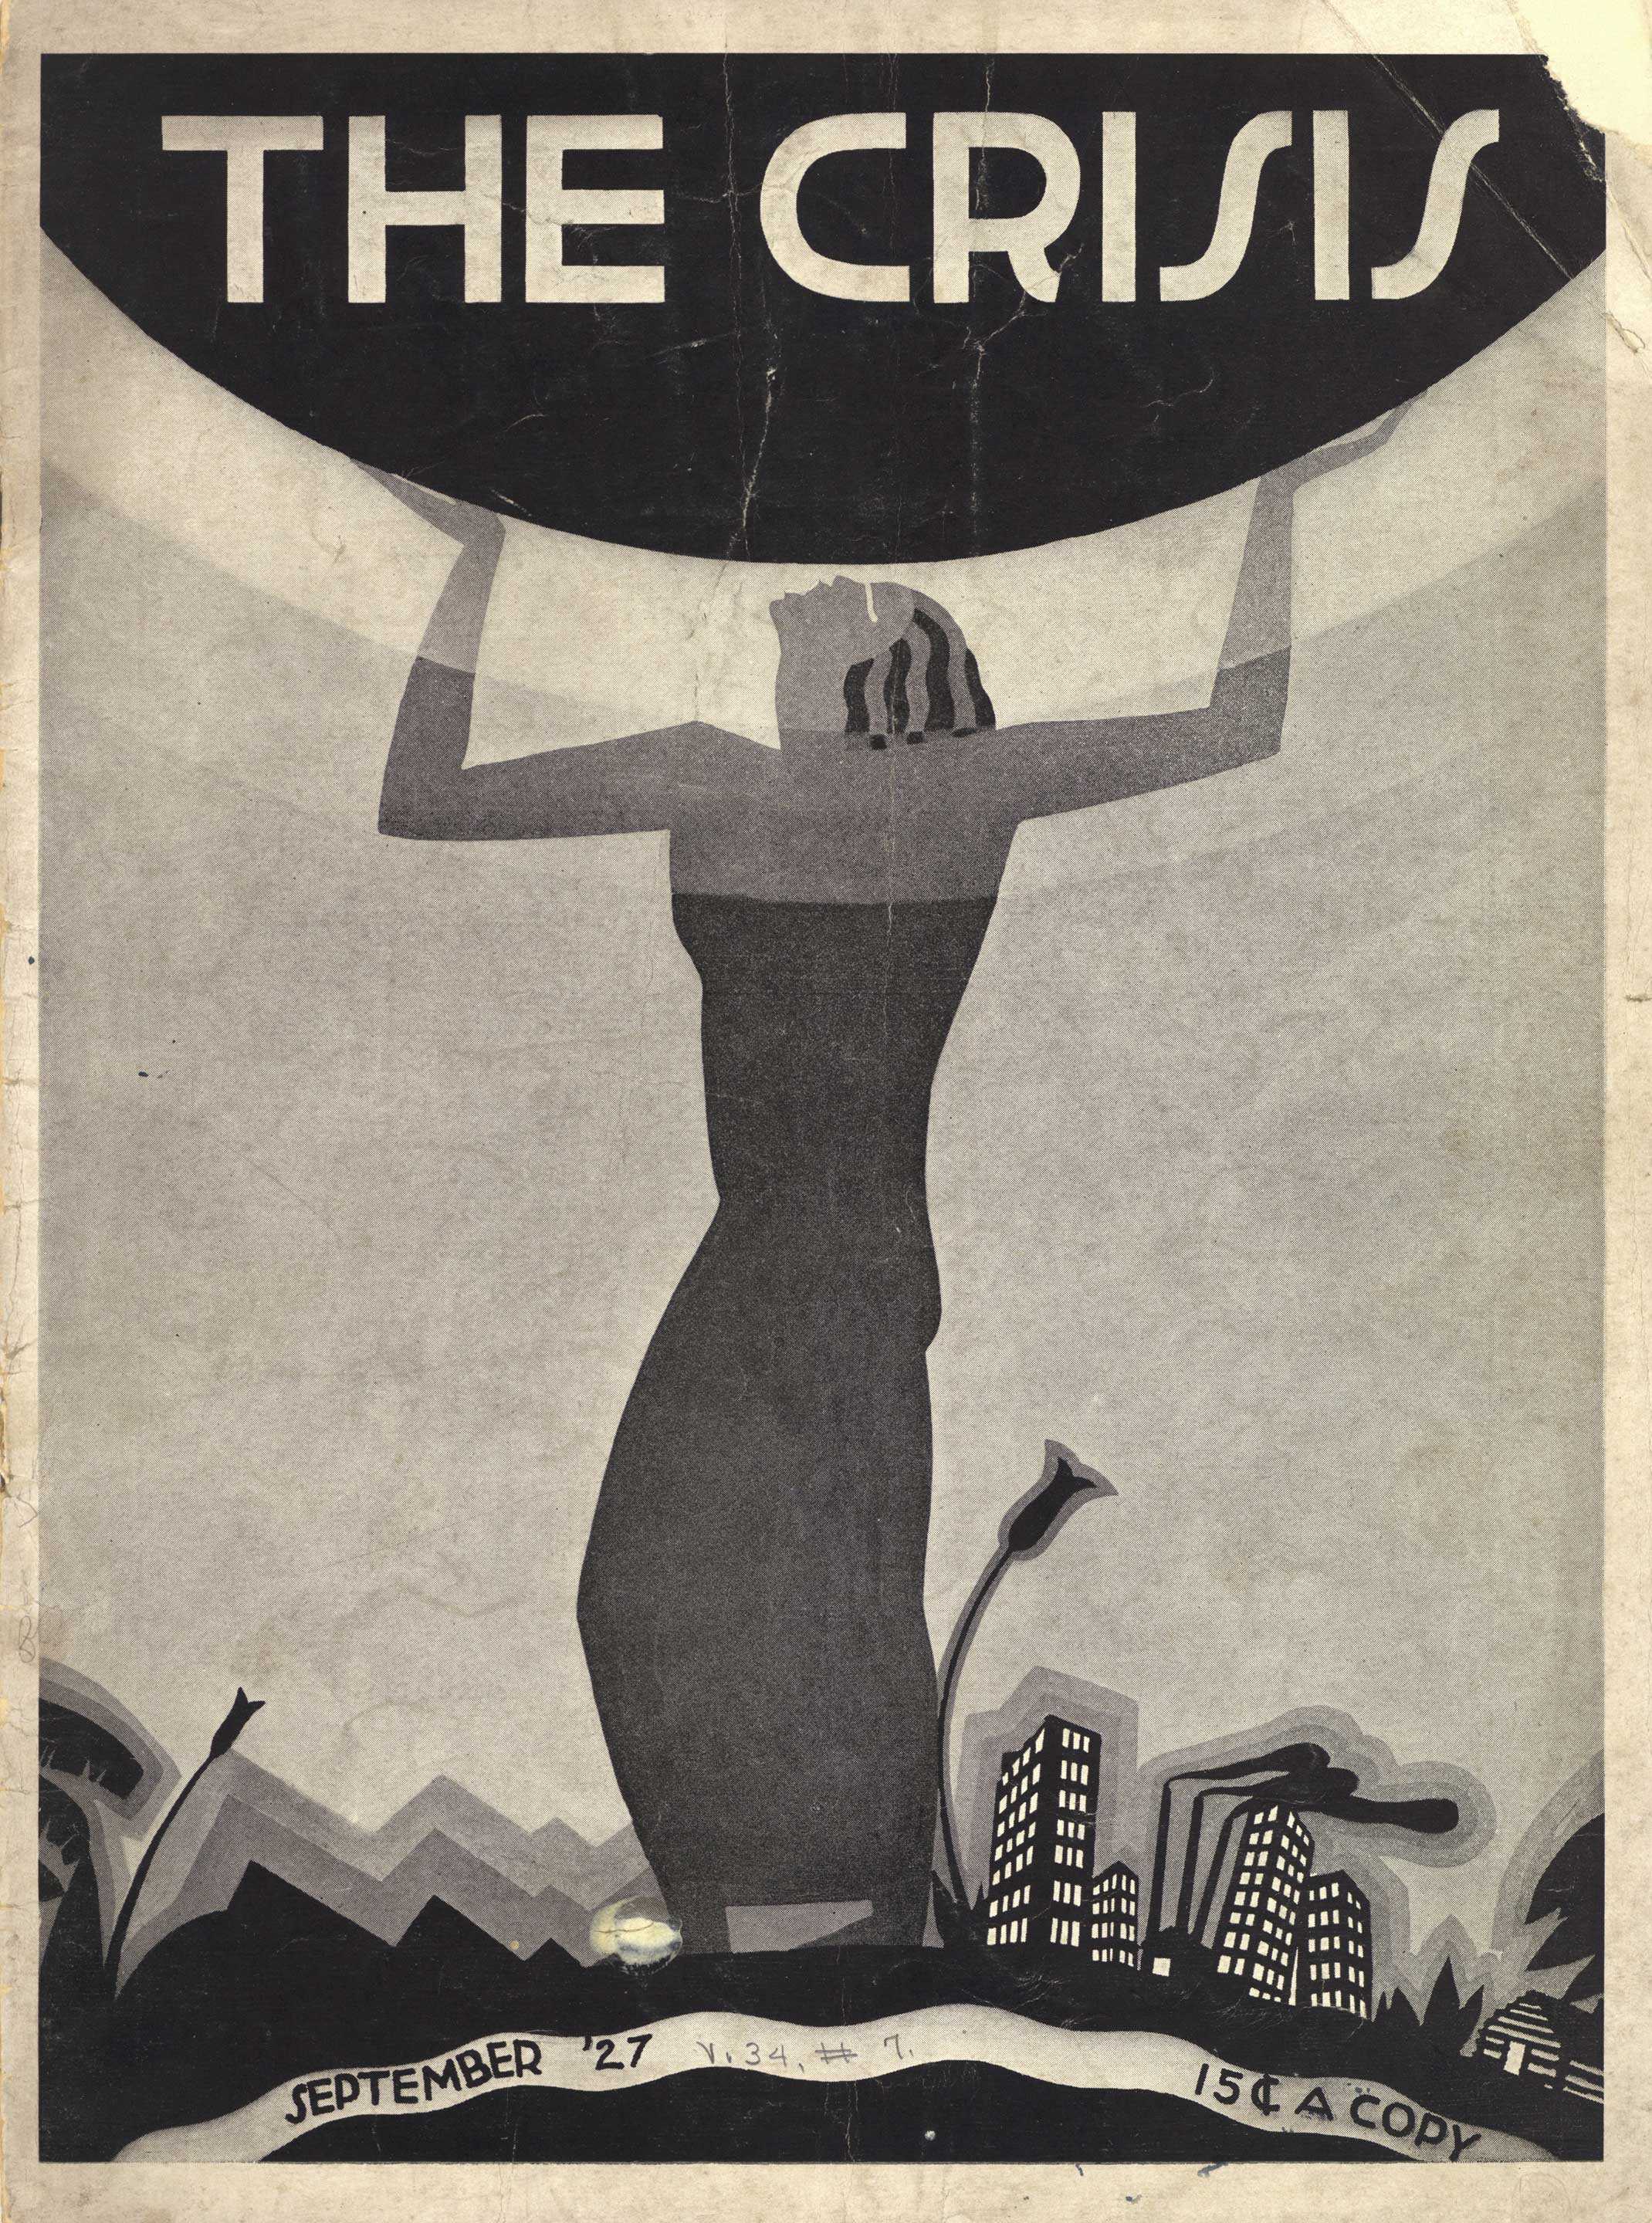 A black and white magazine cover of a graphic woman holding up a dark circle against a skyline in the distance.